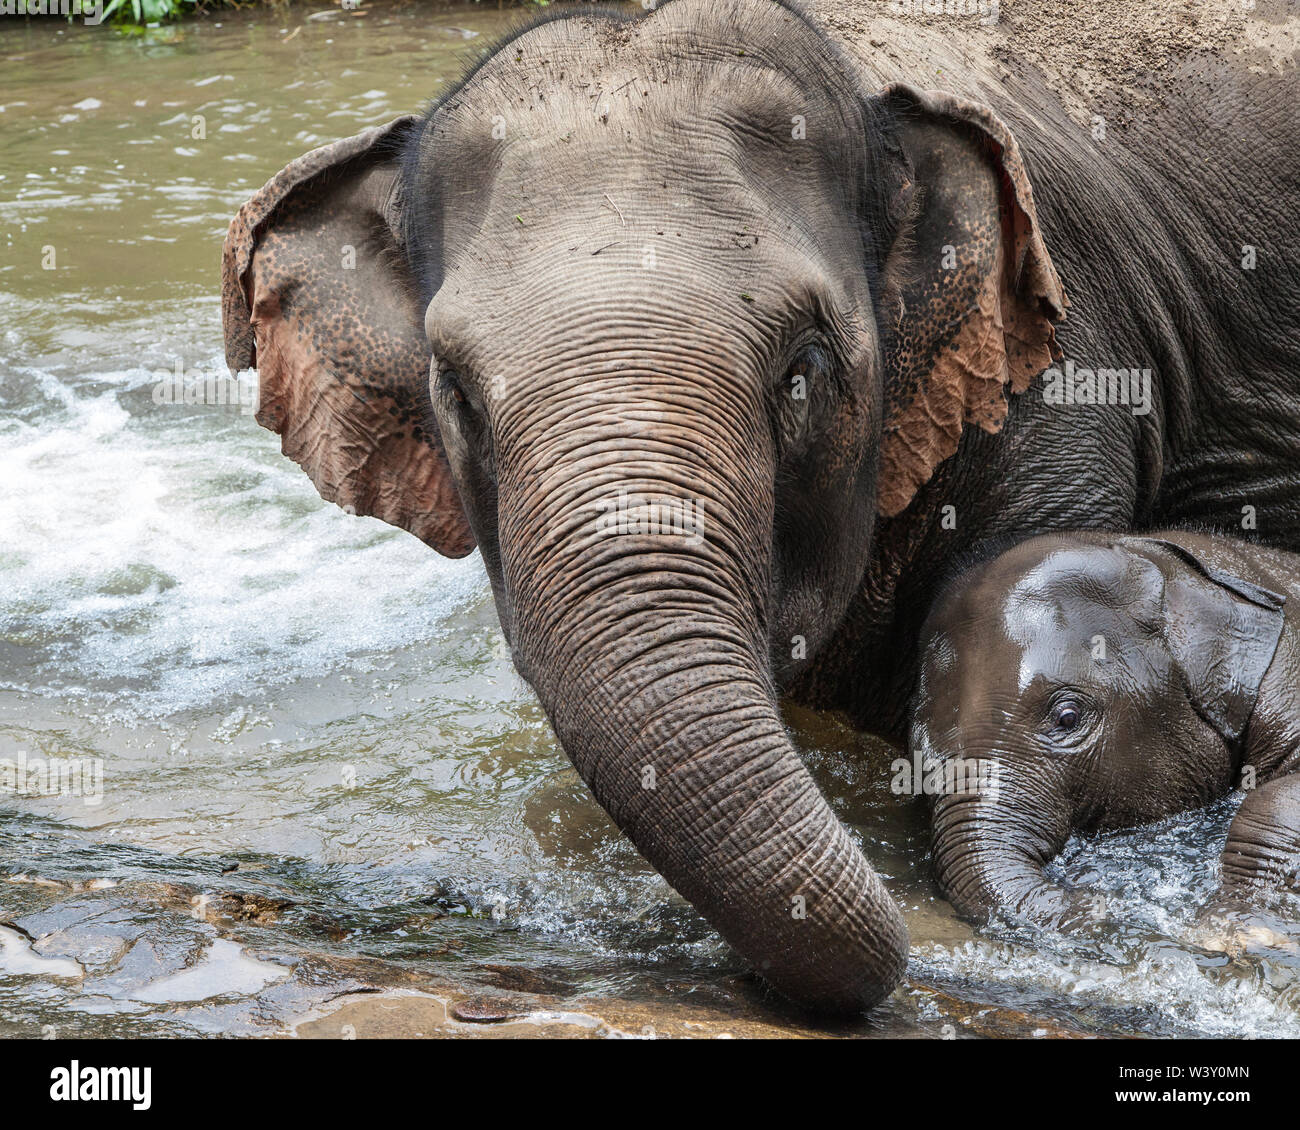 Mother elephant bathing with her baby, Mae Wang, Chiang Mai, Thailand. Stock Photo